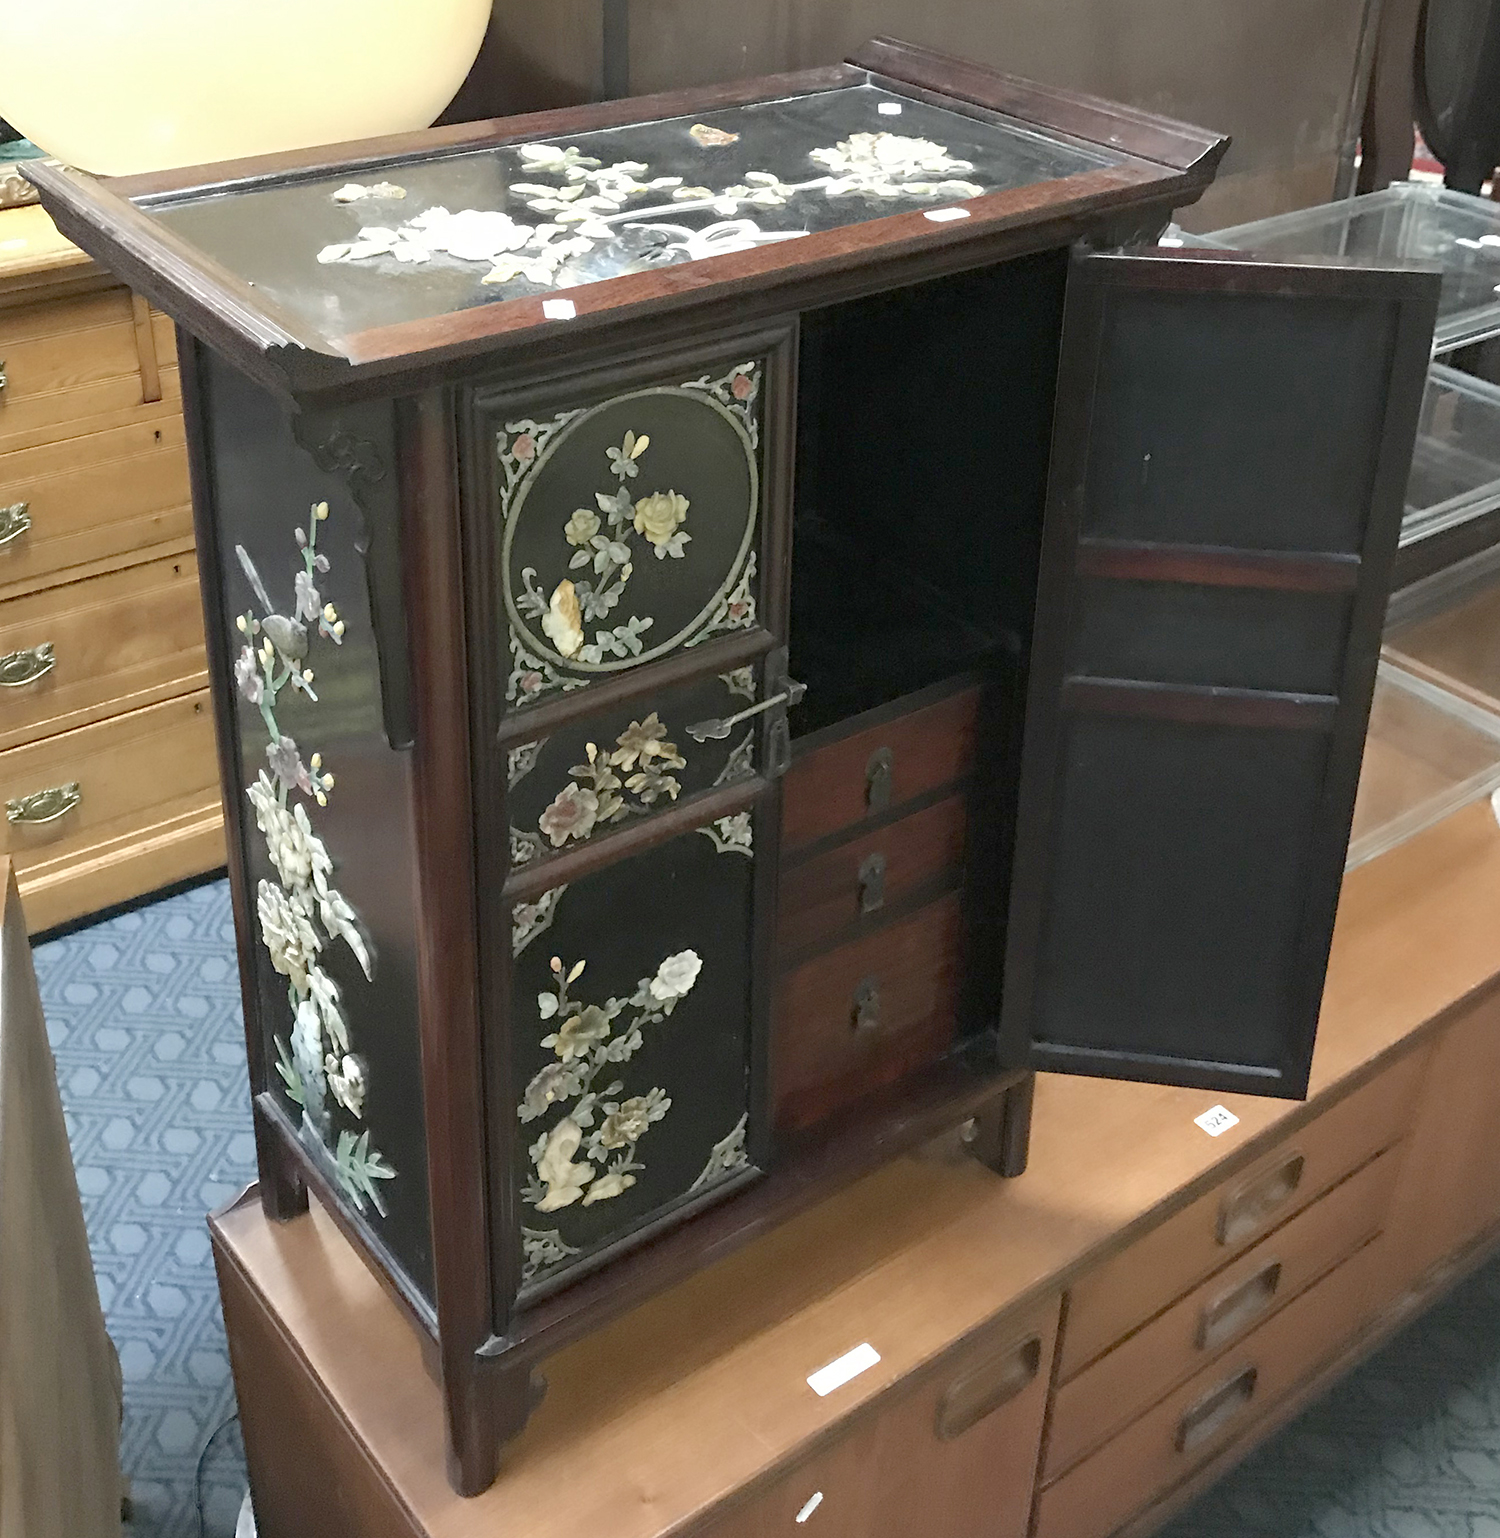 CHINESE CABINET